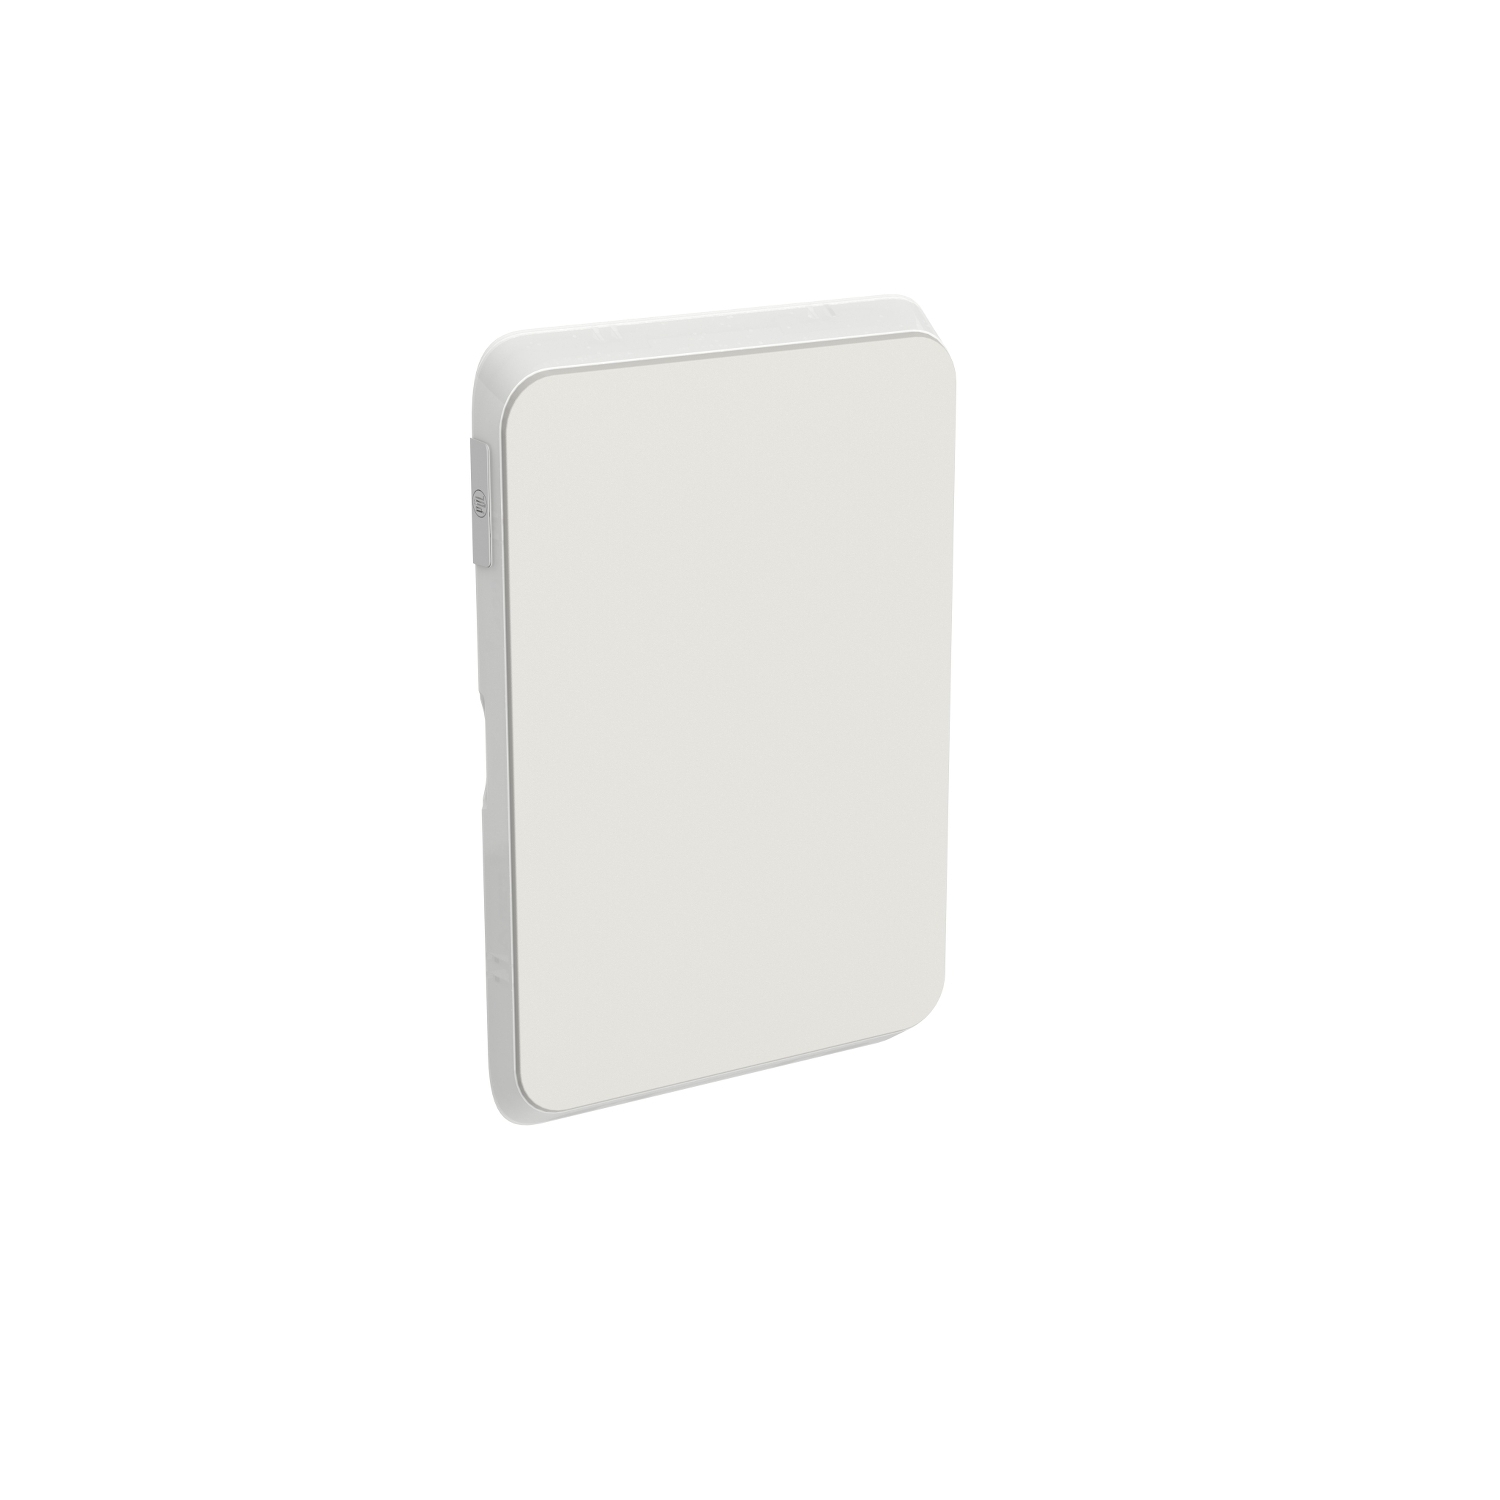 PDL350C-CY - PDL Iconic Cover Plate Blank Plate - Cool Grey